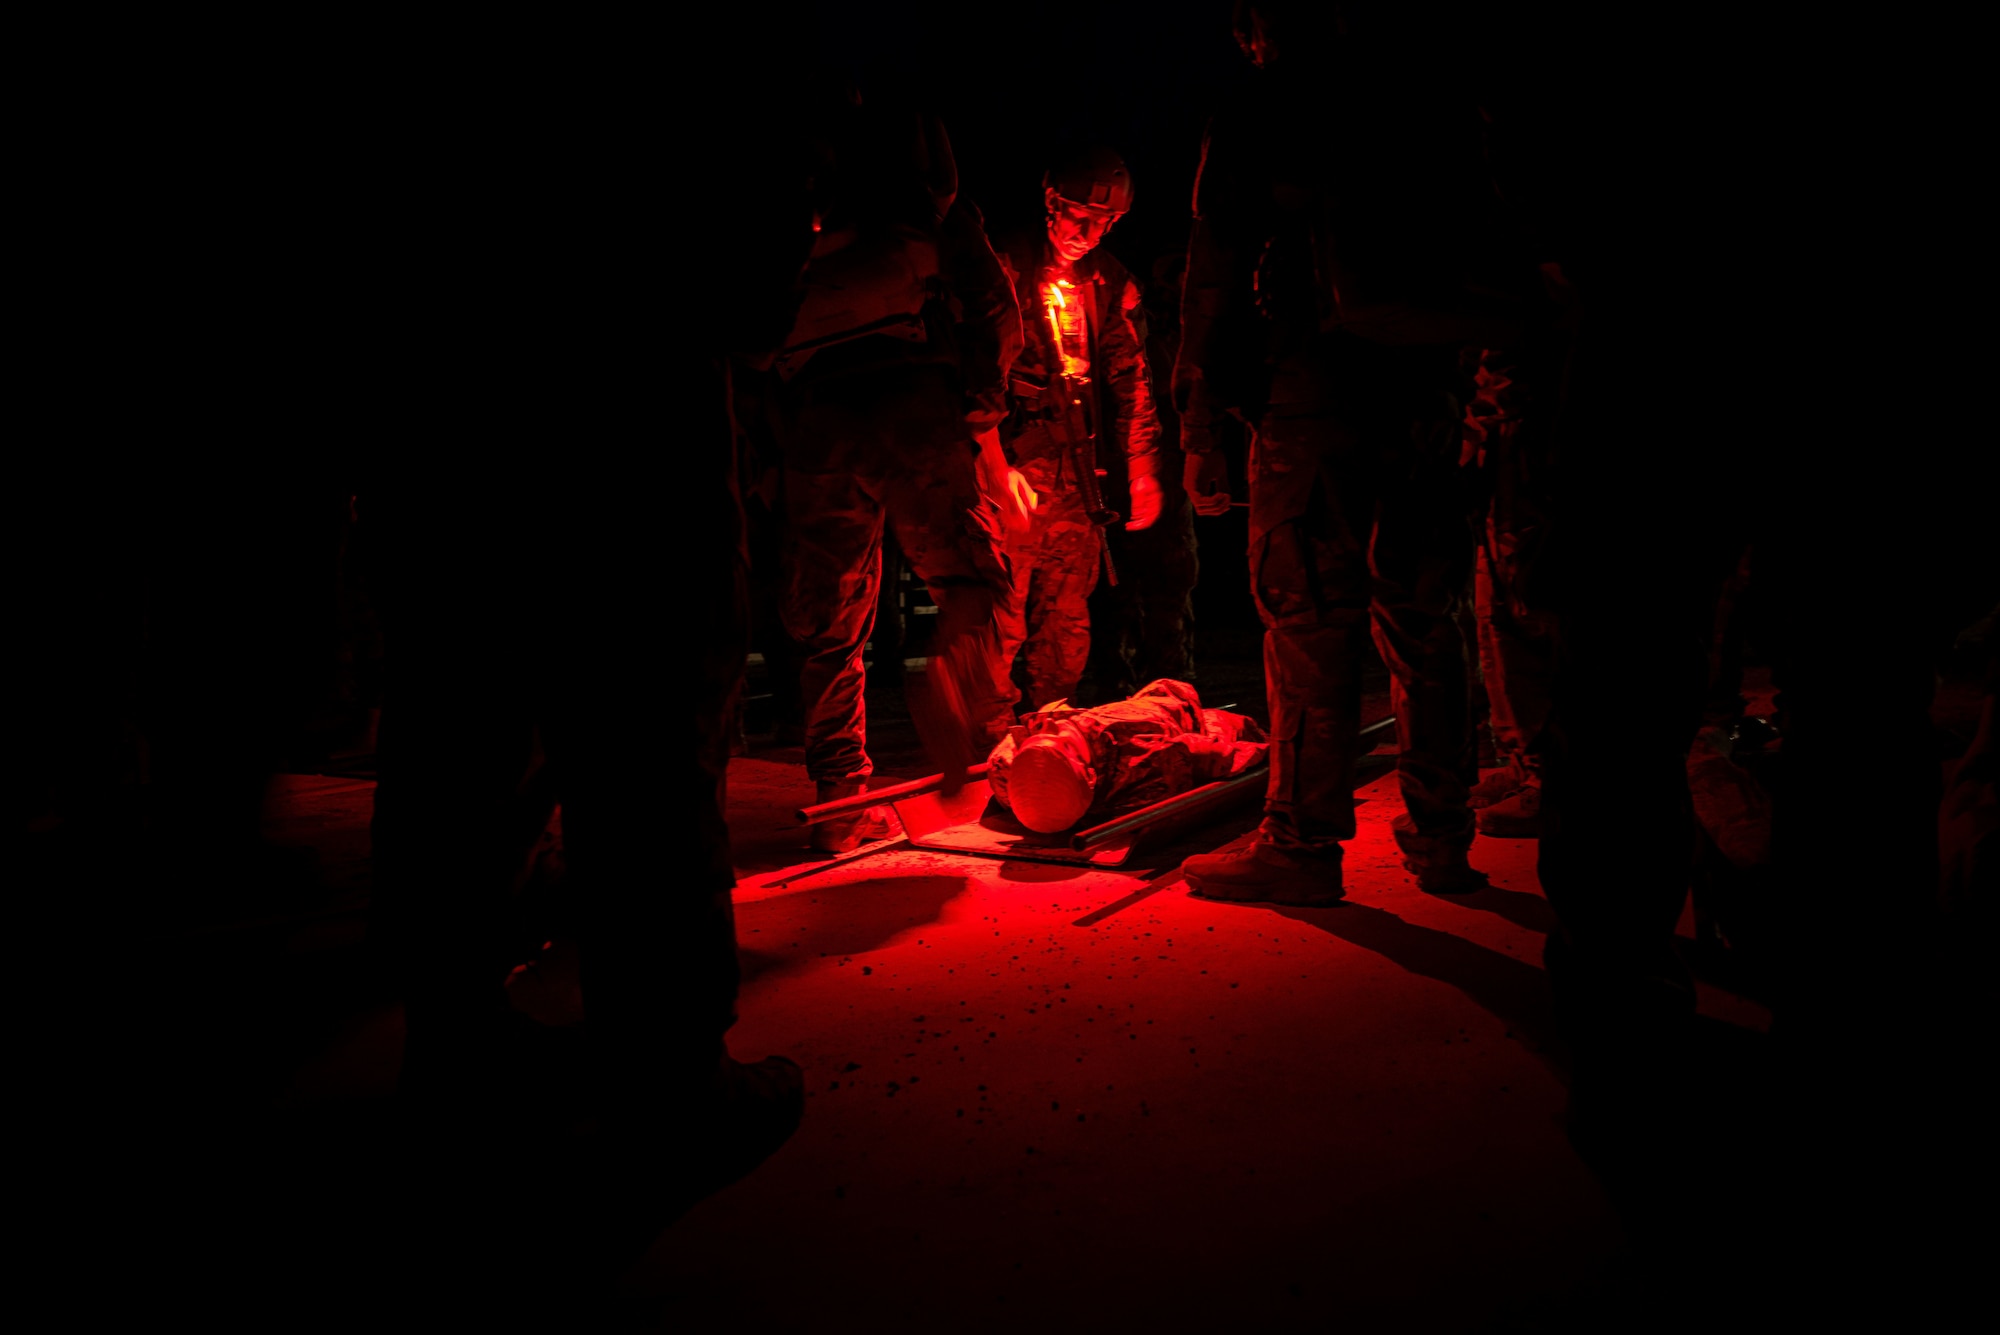 in the dark, Airmen practice paramedic work in the glow of their red headlamps